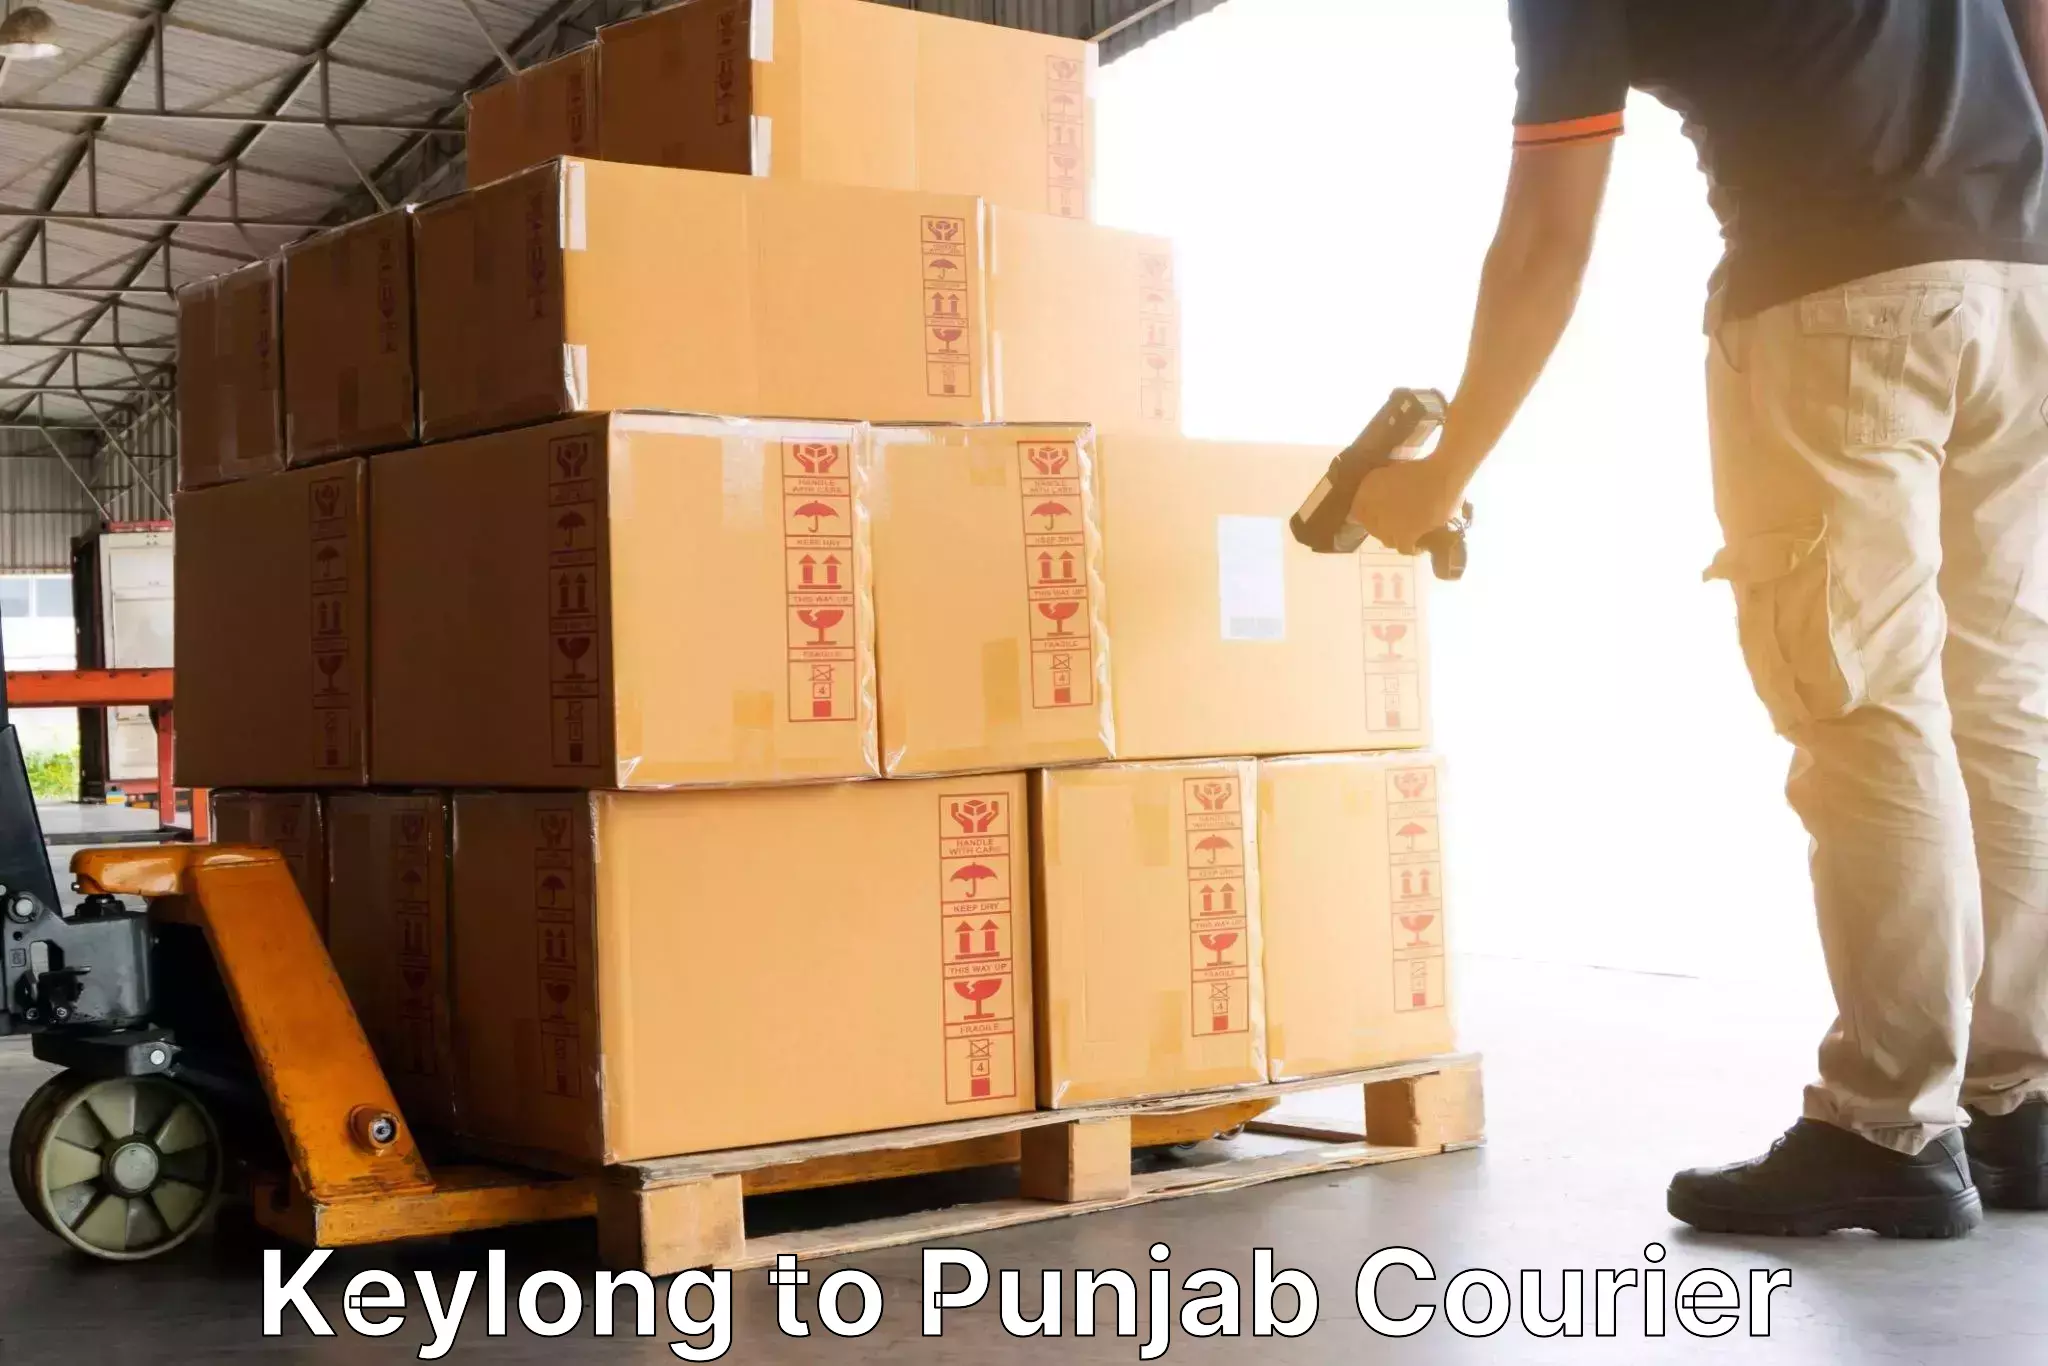 Global courier networks Keylong to Punjab